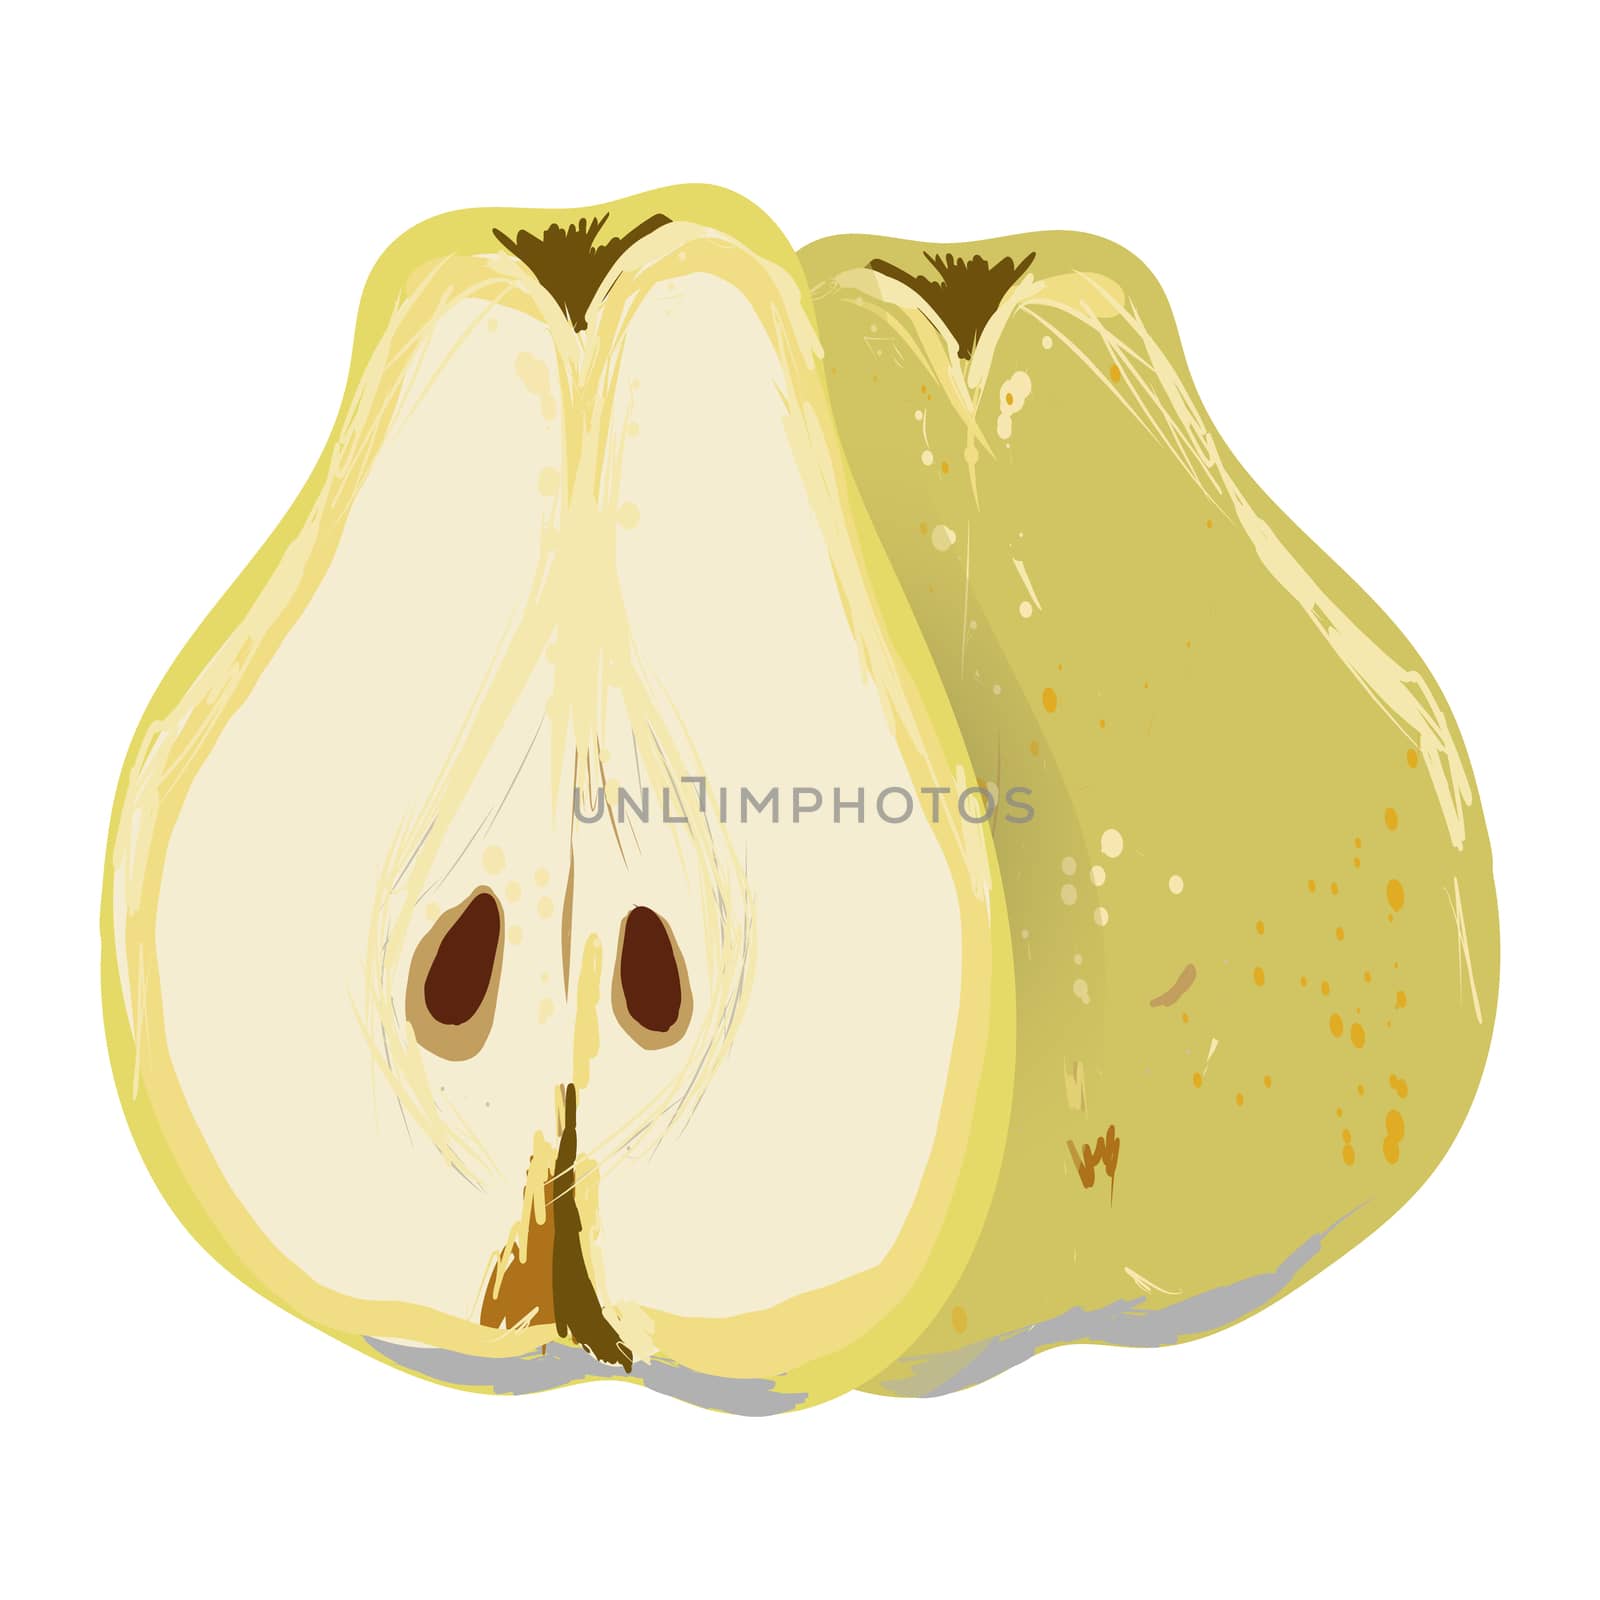 Pear whole and cut in half isolated on white background vector illustration. Summer fruit set for design, banner, menu, poster.